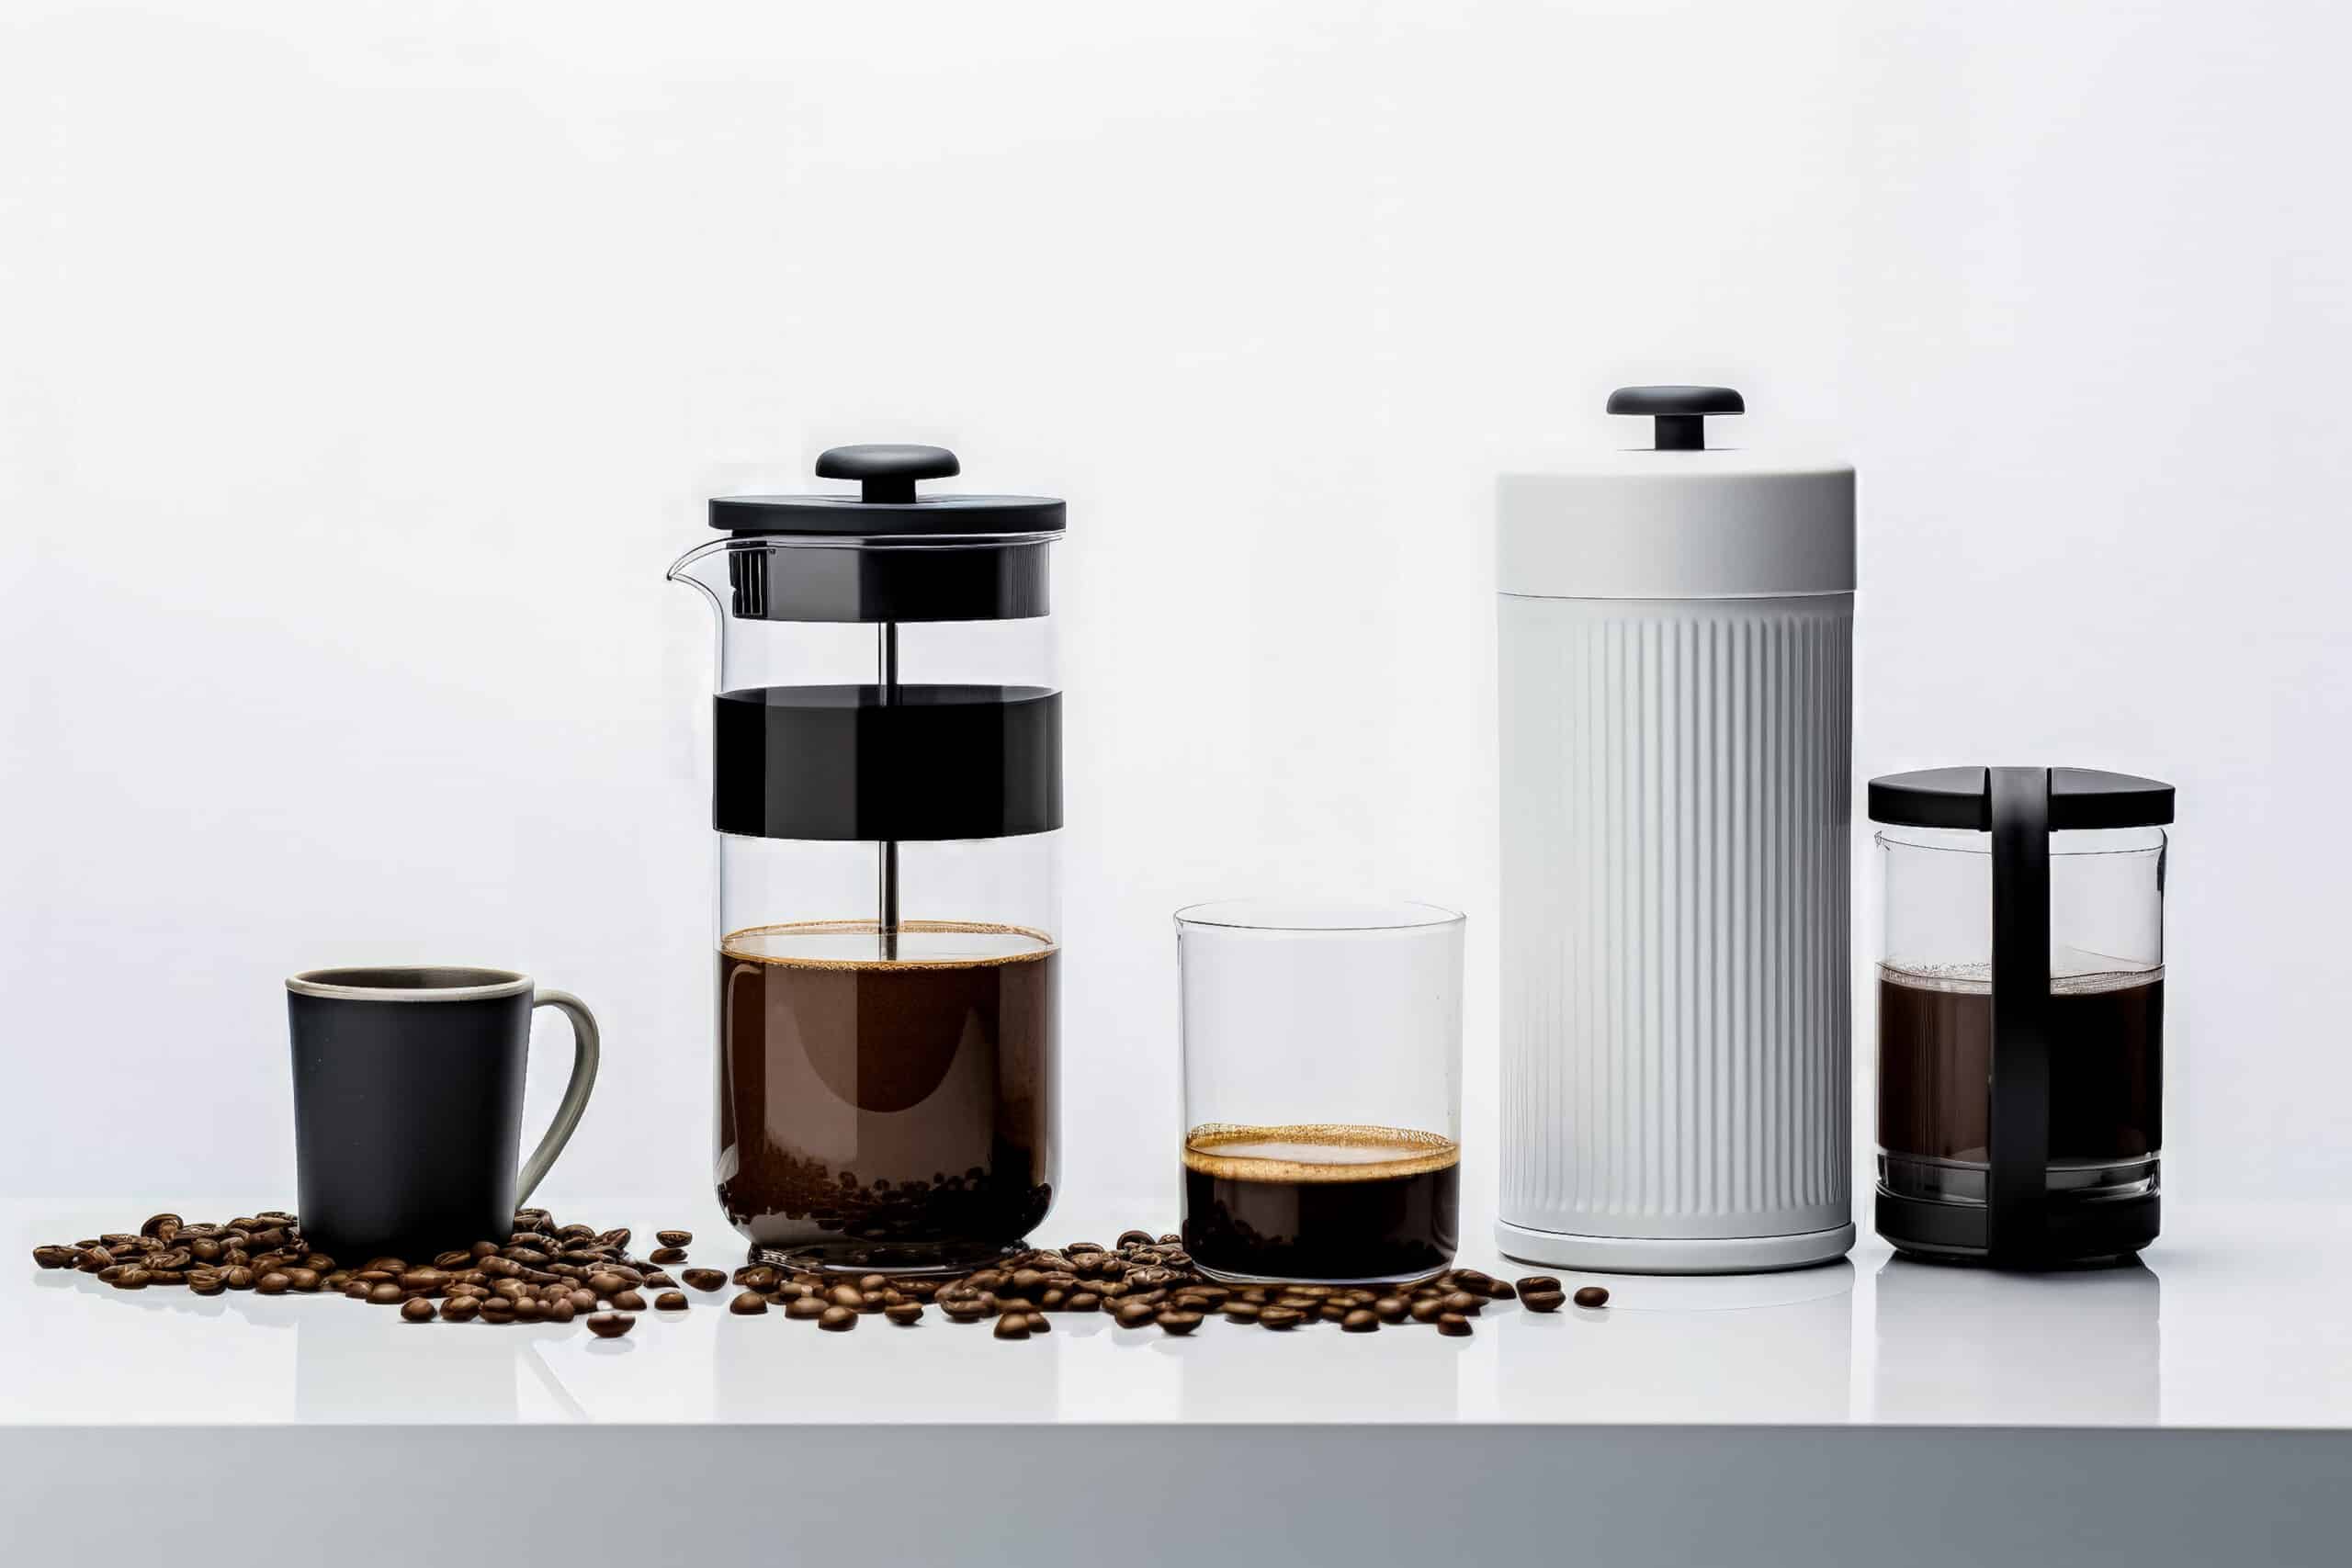 www.appr.com : How To Make Strong Coffee With French Press?